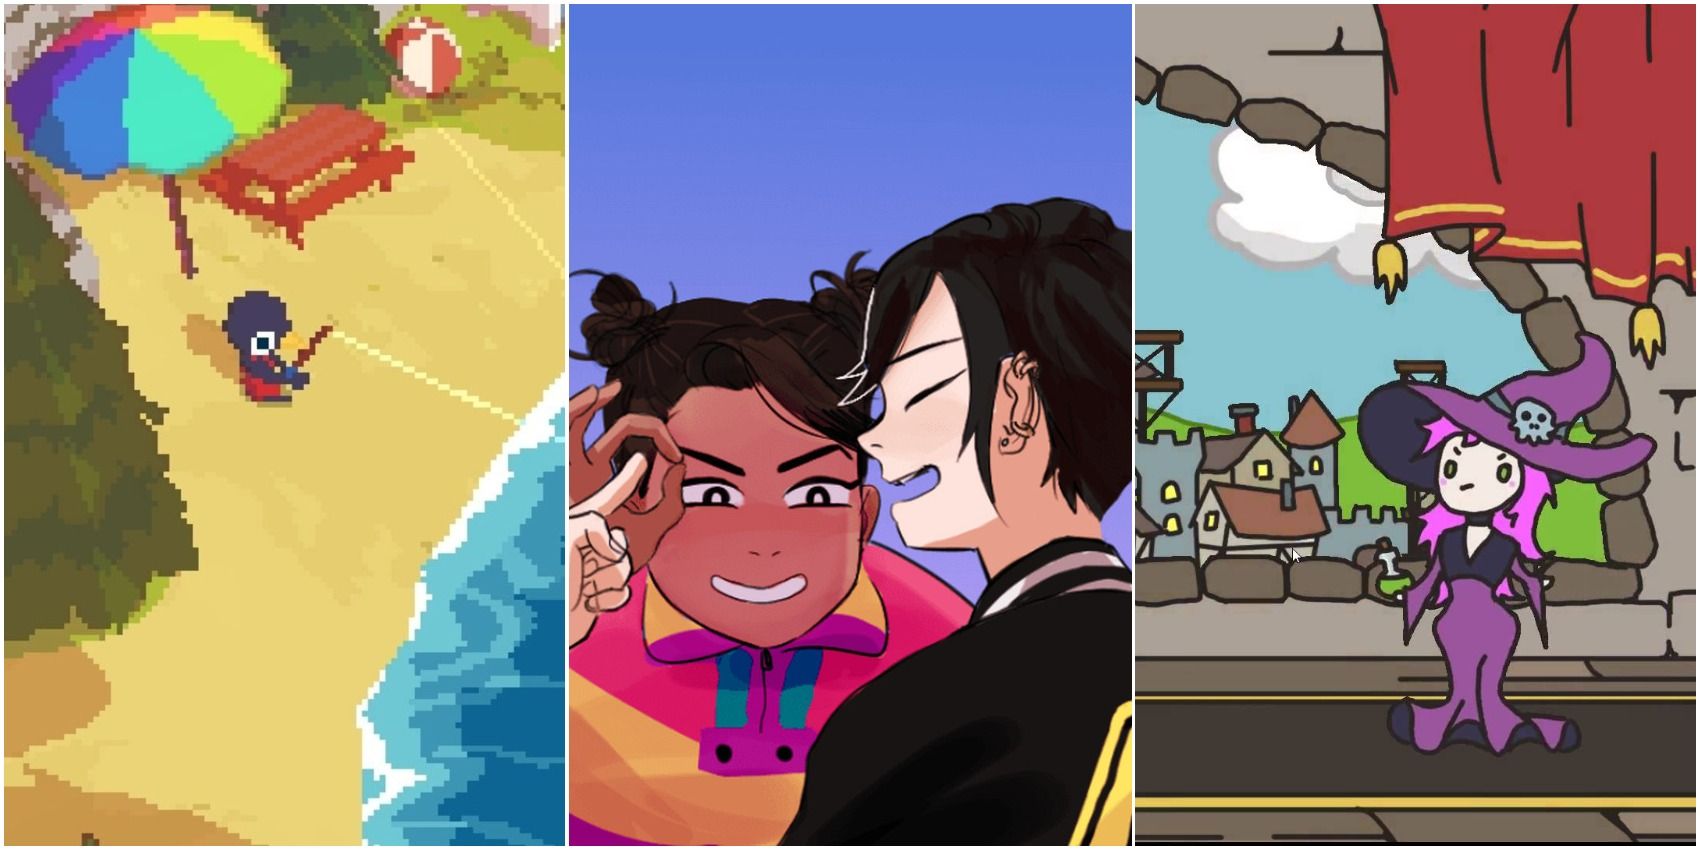 15 Best Free Games On itch.io You Should Check Out - Cultured Vultures